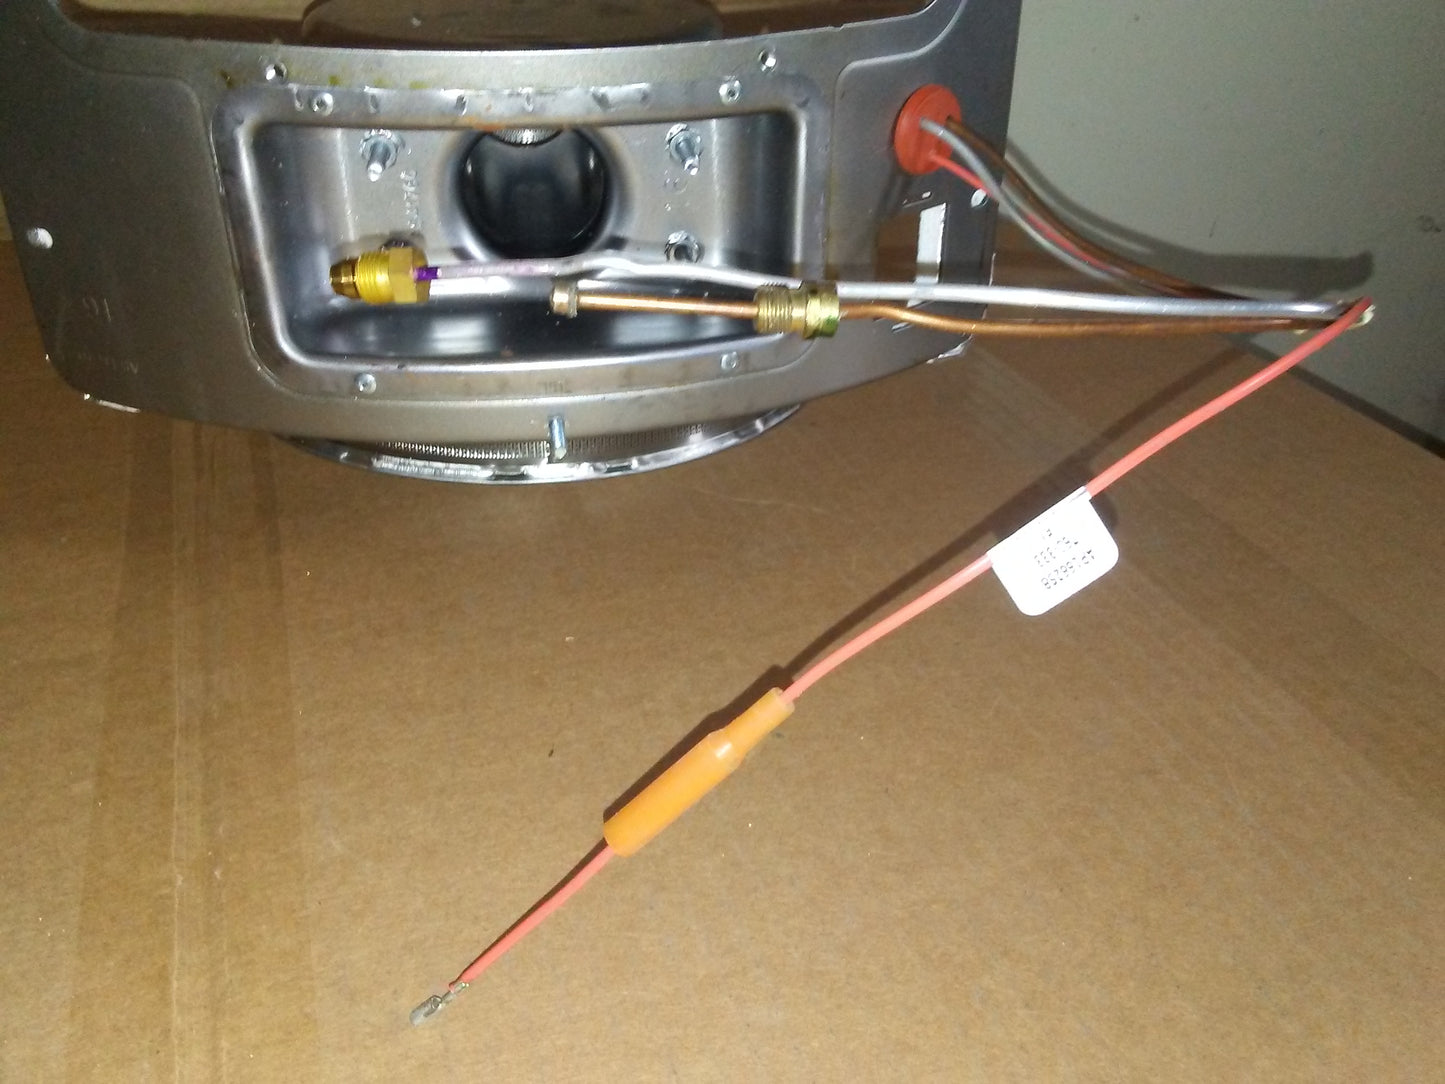 BURNER ASSEMBLY FOR A 40/50 GALLON WATER HEATER